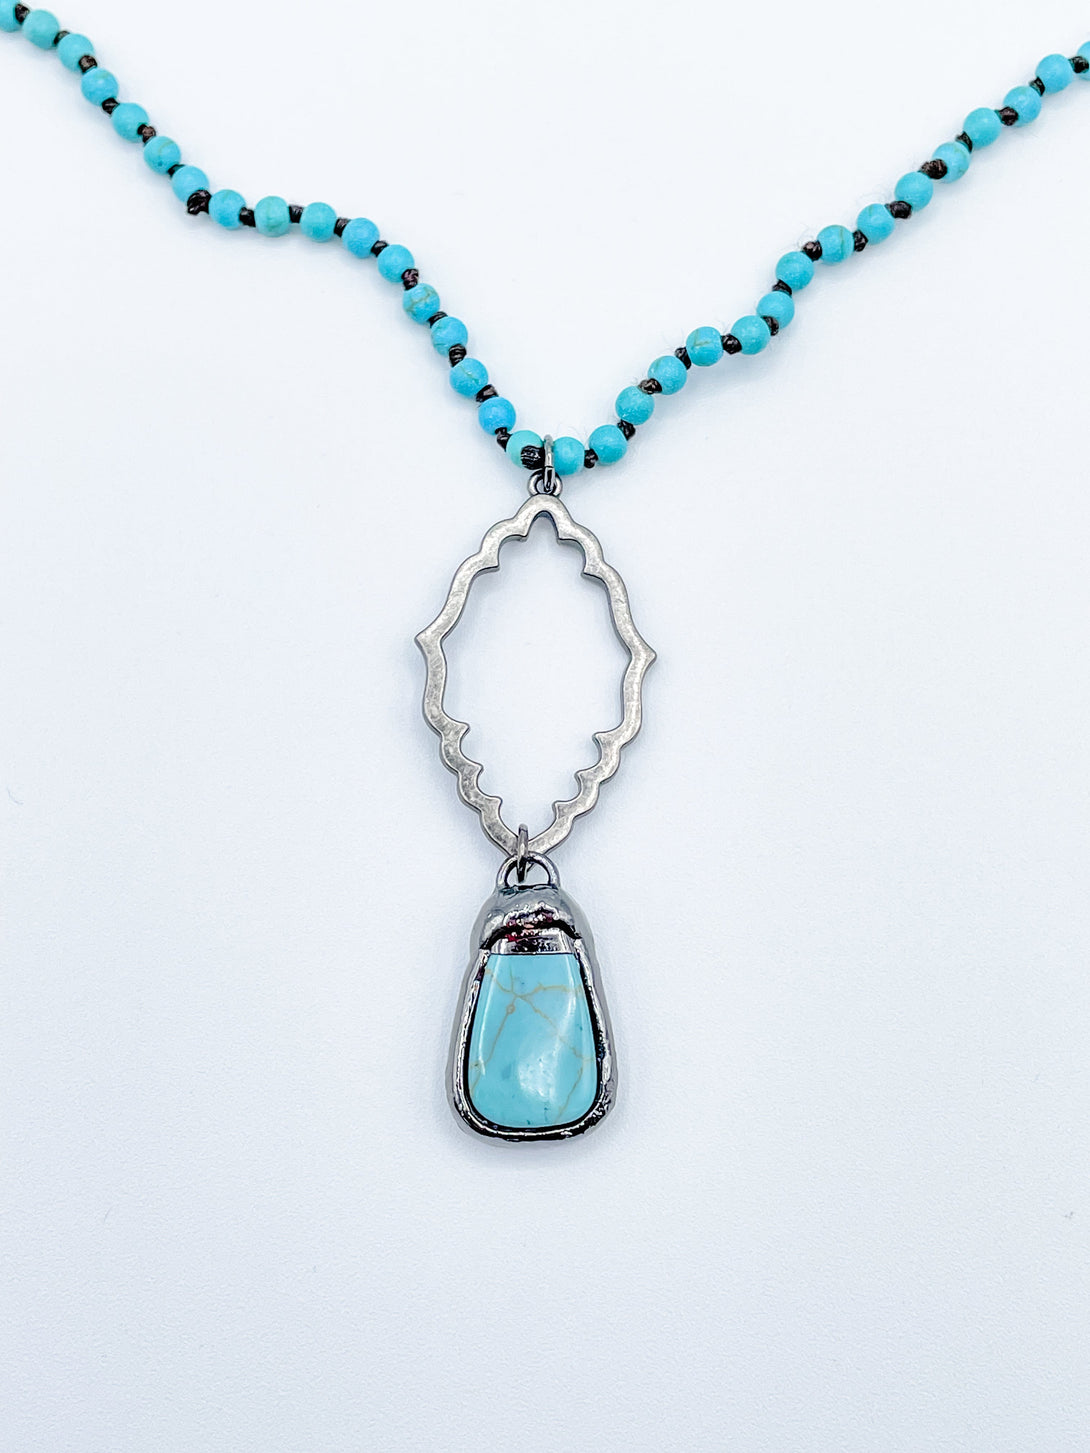 Long Blue Beaded Necklace with Stone Pendant and  Filigree Connector